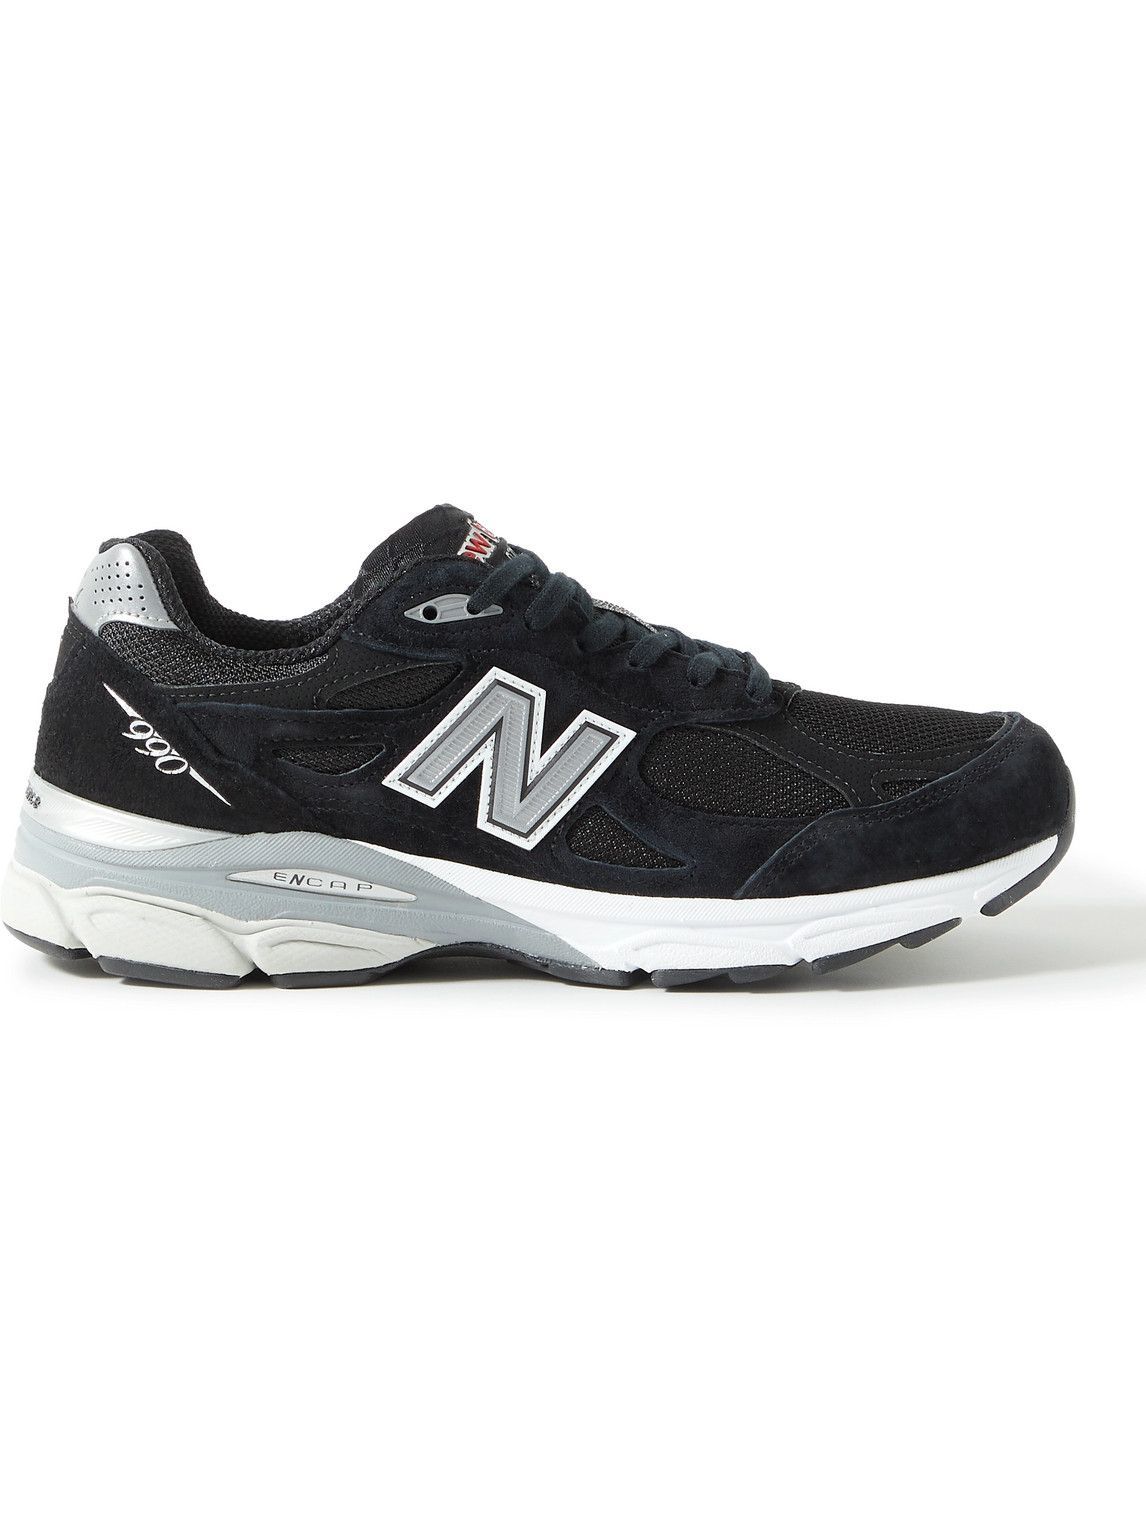 New Balance - 990v3 Suede and Mesh Sneakers - Black